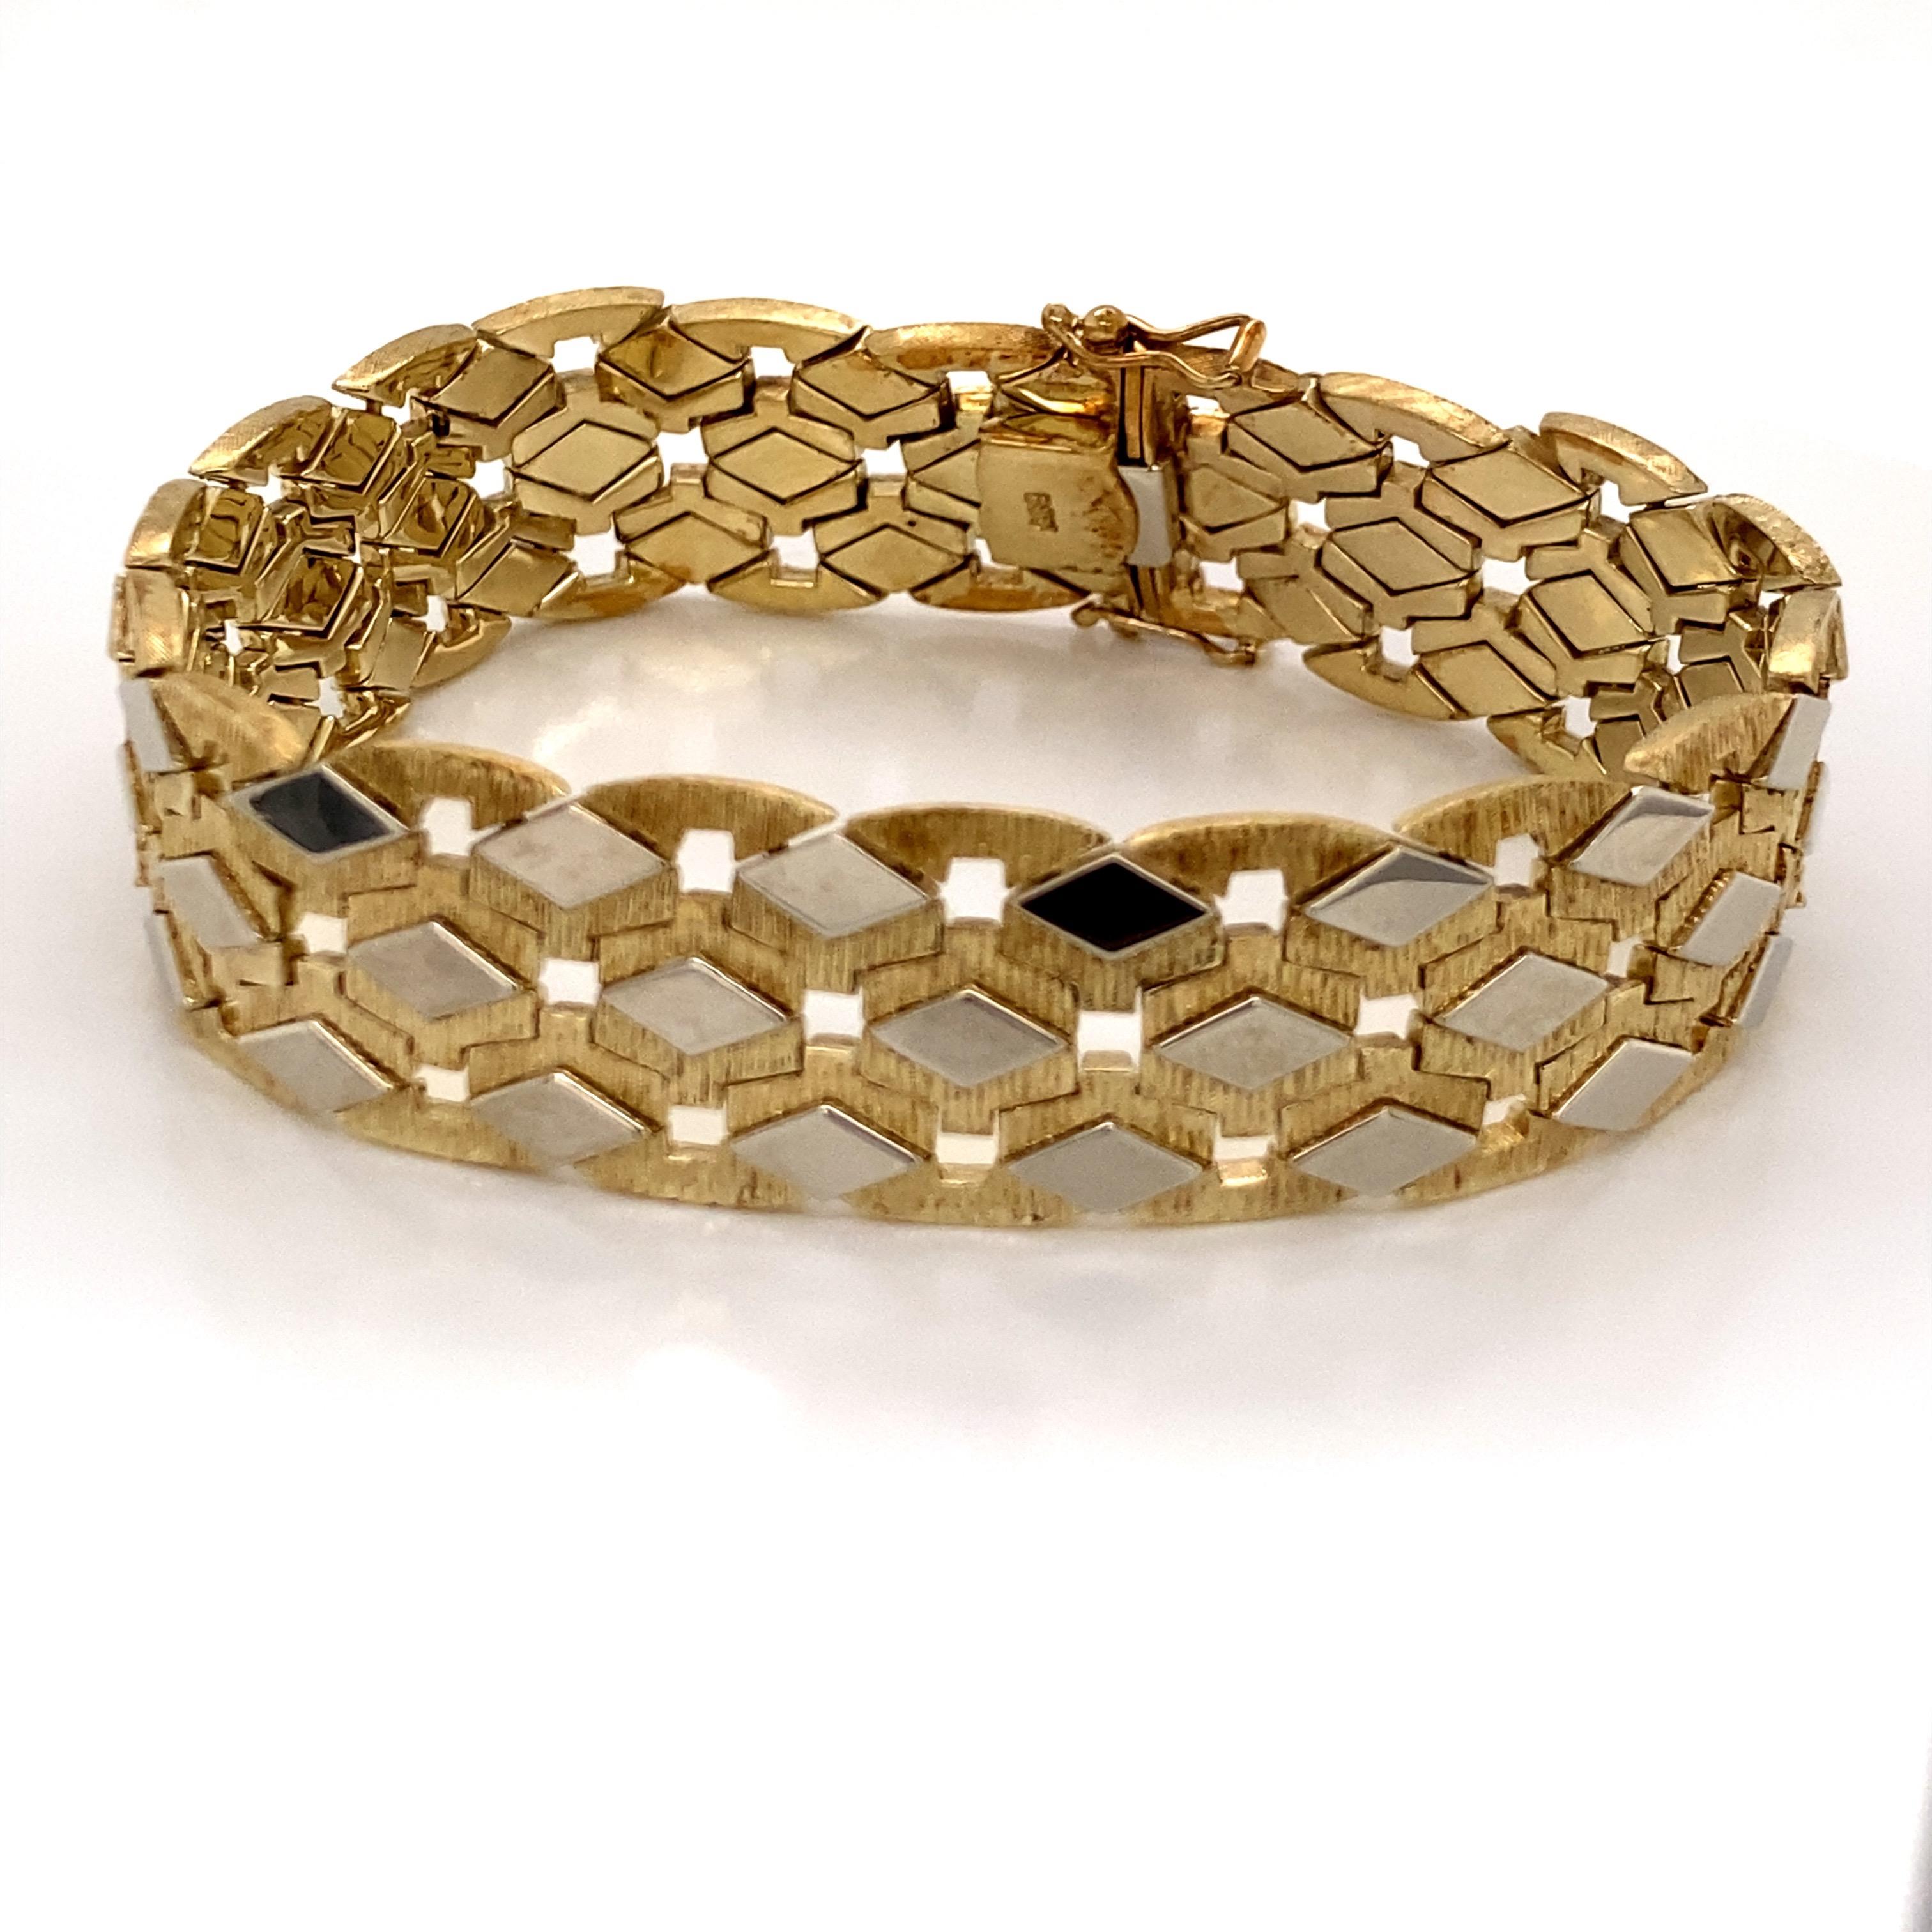 Vintage 1960's 14K Two Tone Gold Wide Retro Bracelet - The bracelet measure 7 3/4 inches long and 1/2 inches wide. It features a diamond pattern in white gold links over a yellow gold base. There is a hidden clasp with a double figure 8 safety for